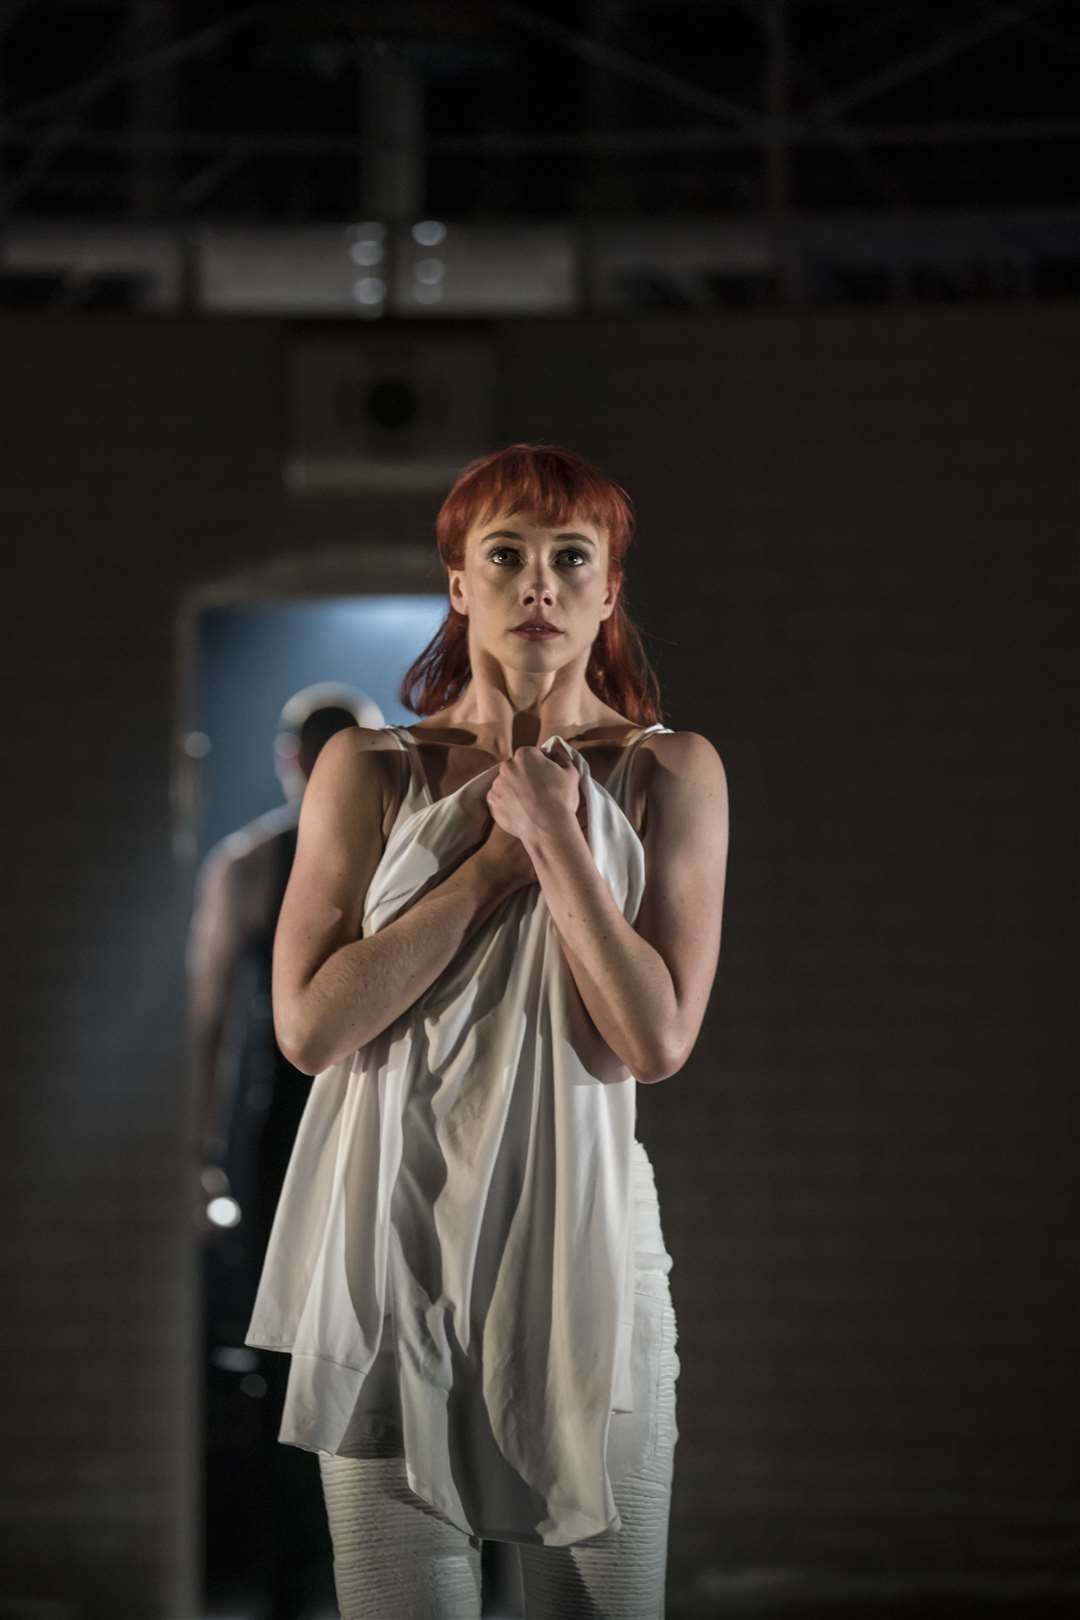 Romeo and Juliet is a re-relling of the classic tale Picture: Johan Persson